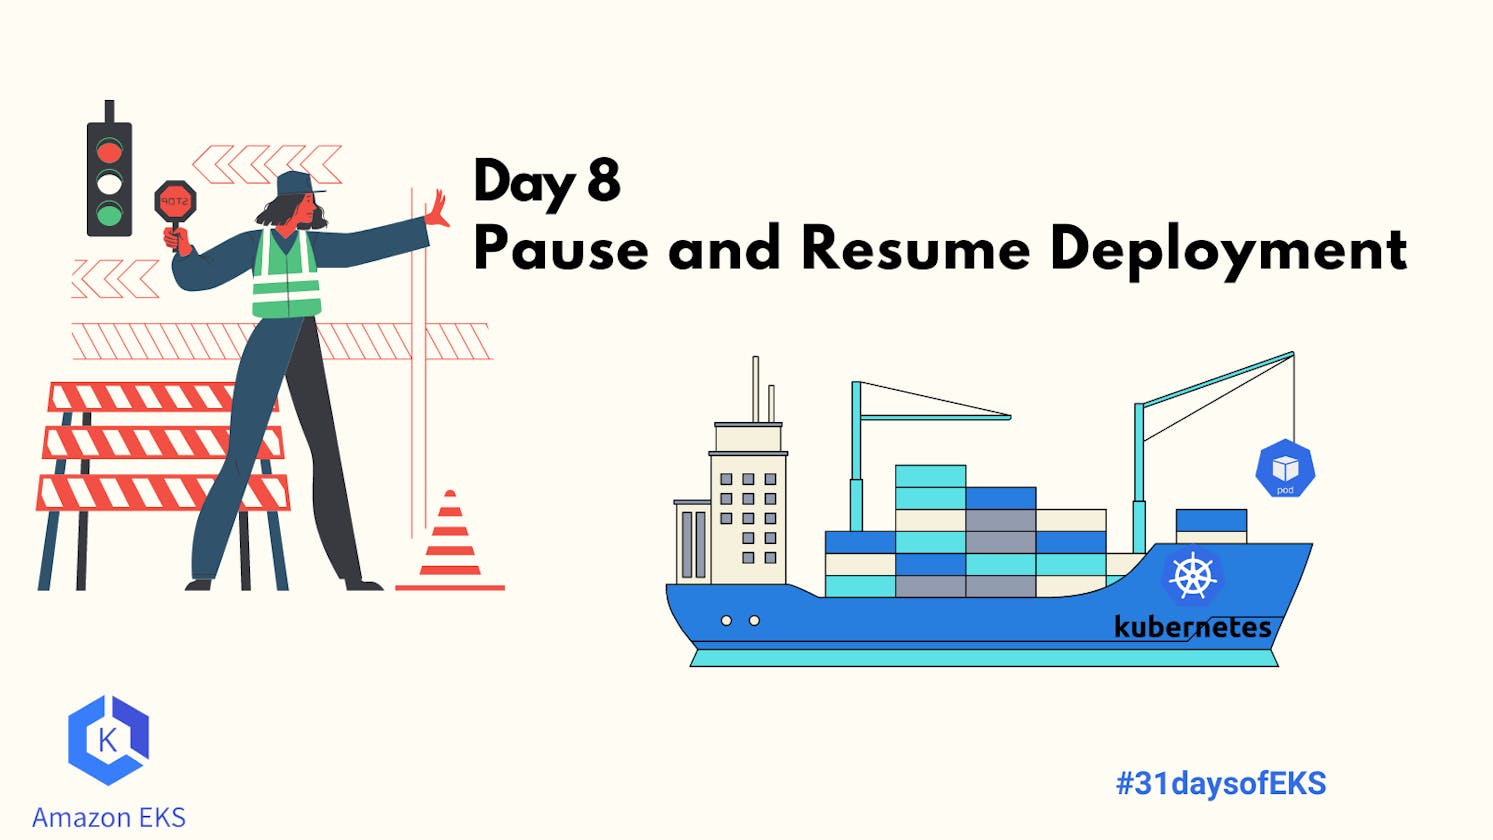 Day 08 Pause and Resume Deployment in Kubernetes.